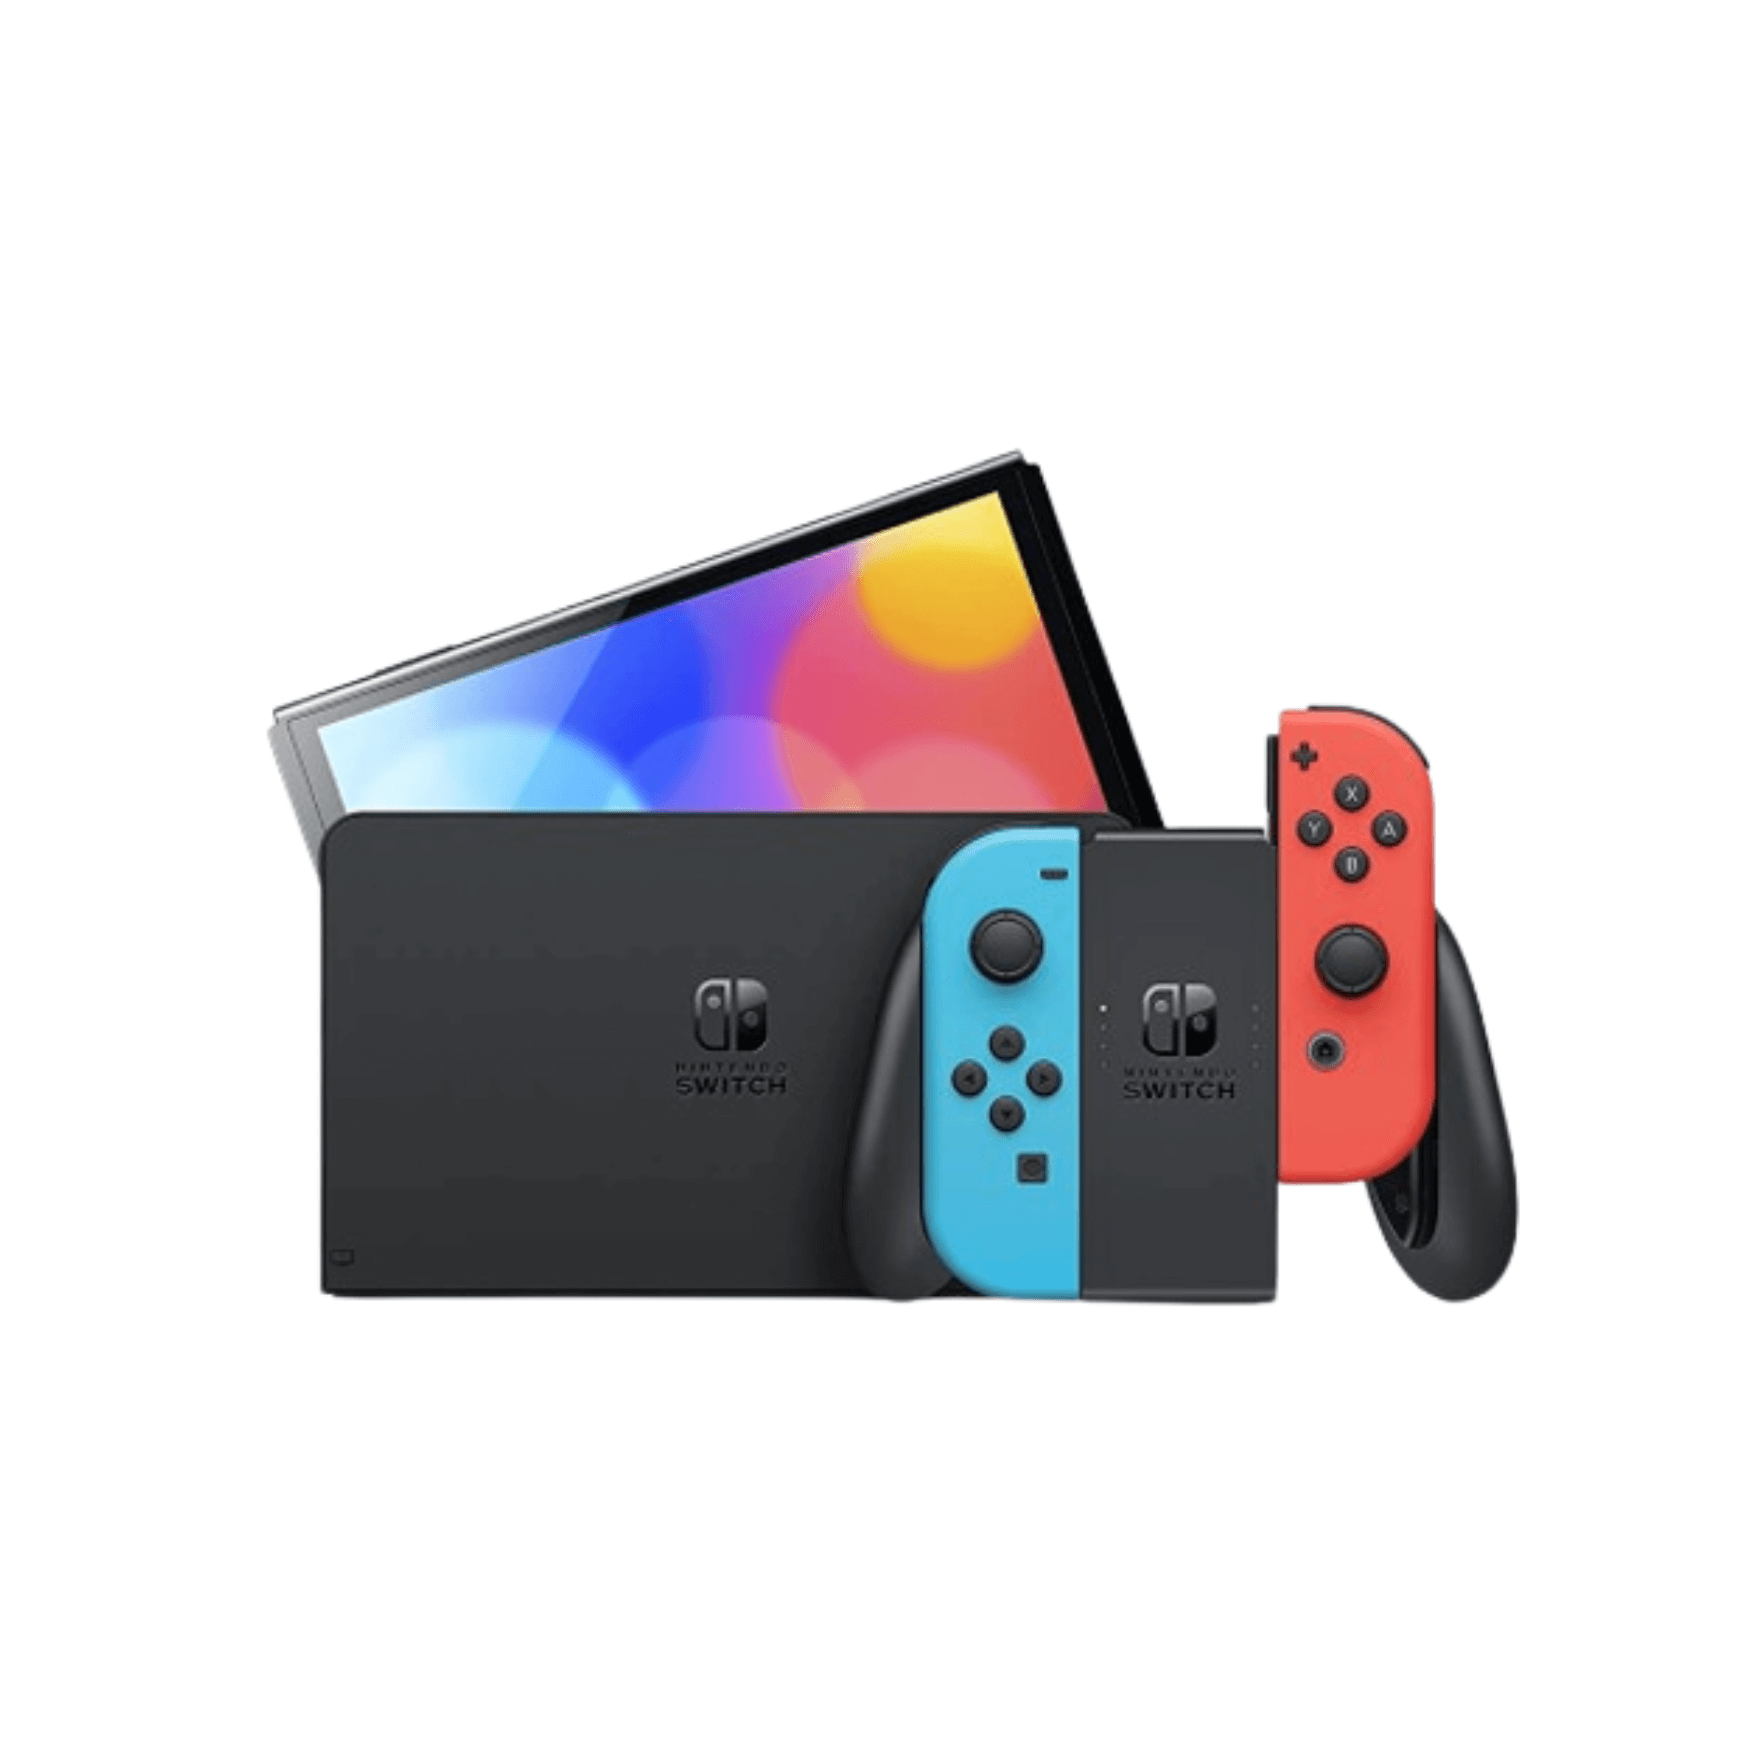 Nintendo Switch OLED Model: Mario Red Edition | Neon Blue / Neon Red | White | 1 Year Nintendo Malaysia Warranty